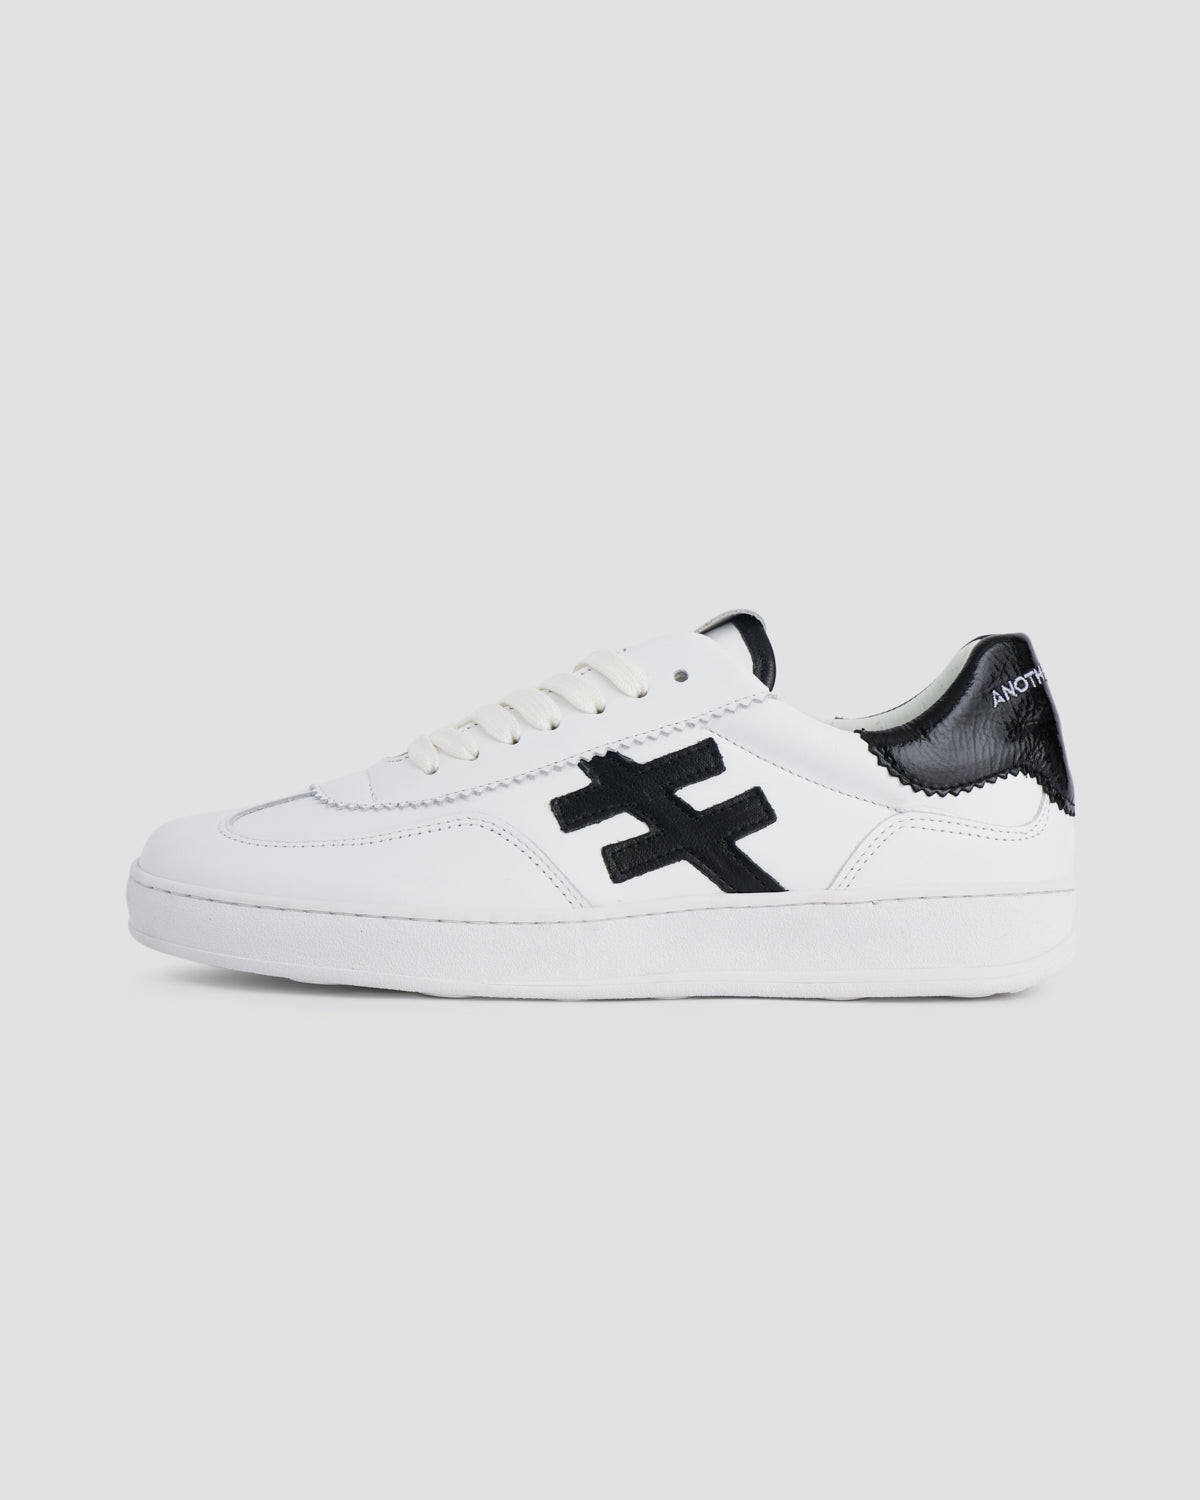 Another Trend - White and Black Trainer